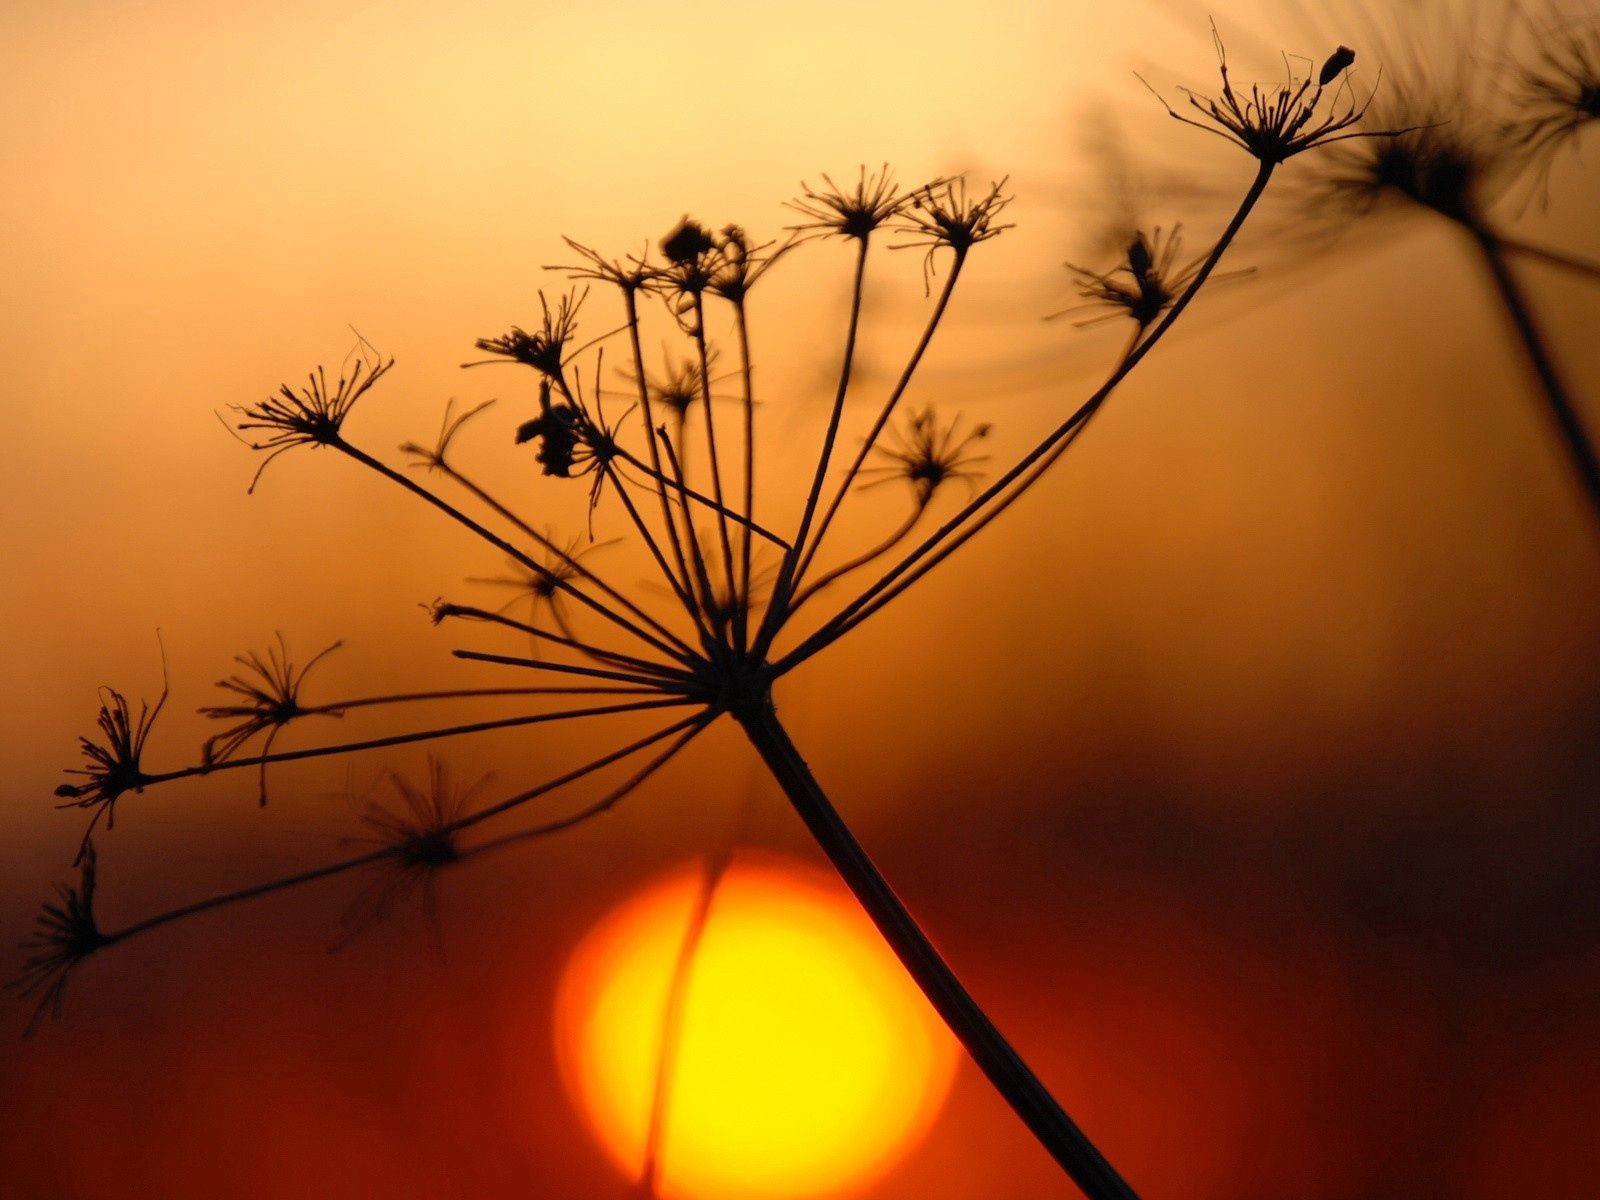 desktop Images shine, sunset, plant, macro, light, bright, shadow, withered, dried up